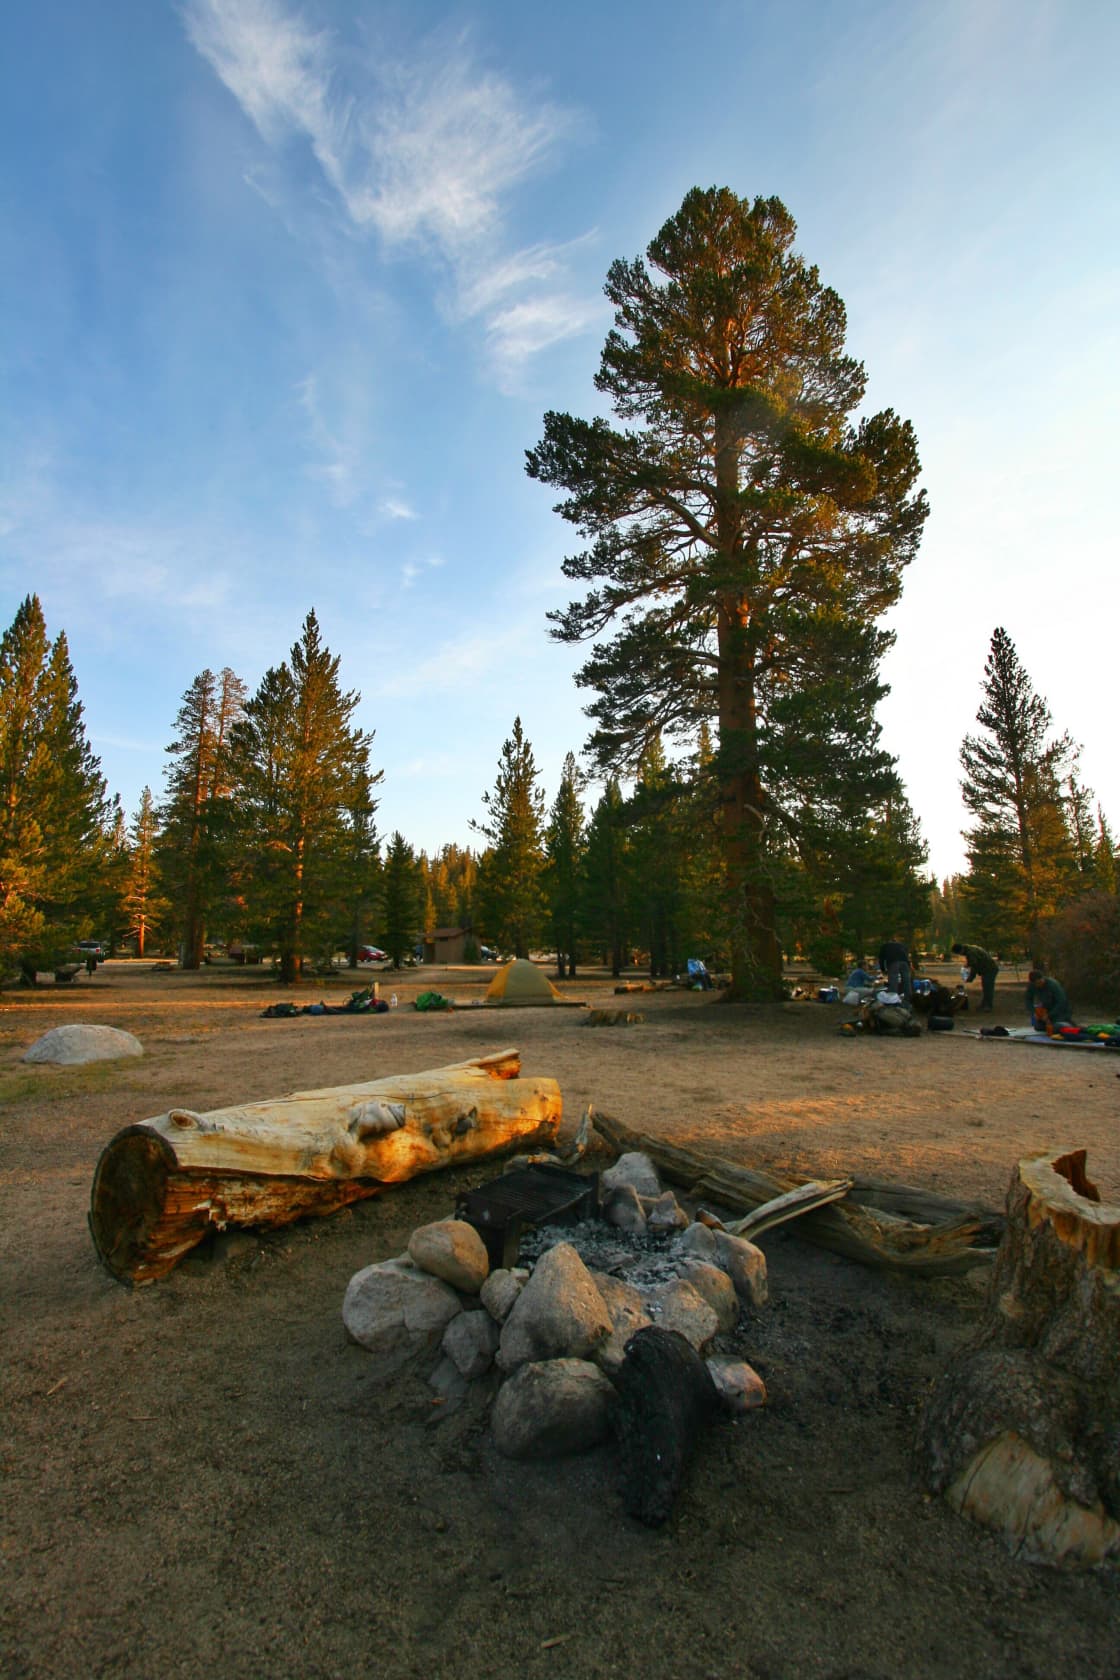 First-come, first-serve campsite. A great place to stay on your way to climb Mt. Whitney or Langley. The campground is at about 10,000ft elevation so it helps with acclimation. There are several trails to alpine lakes in the area. 